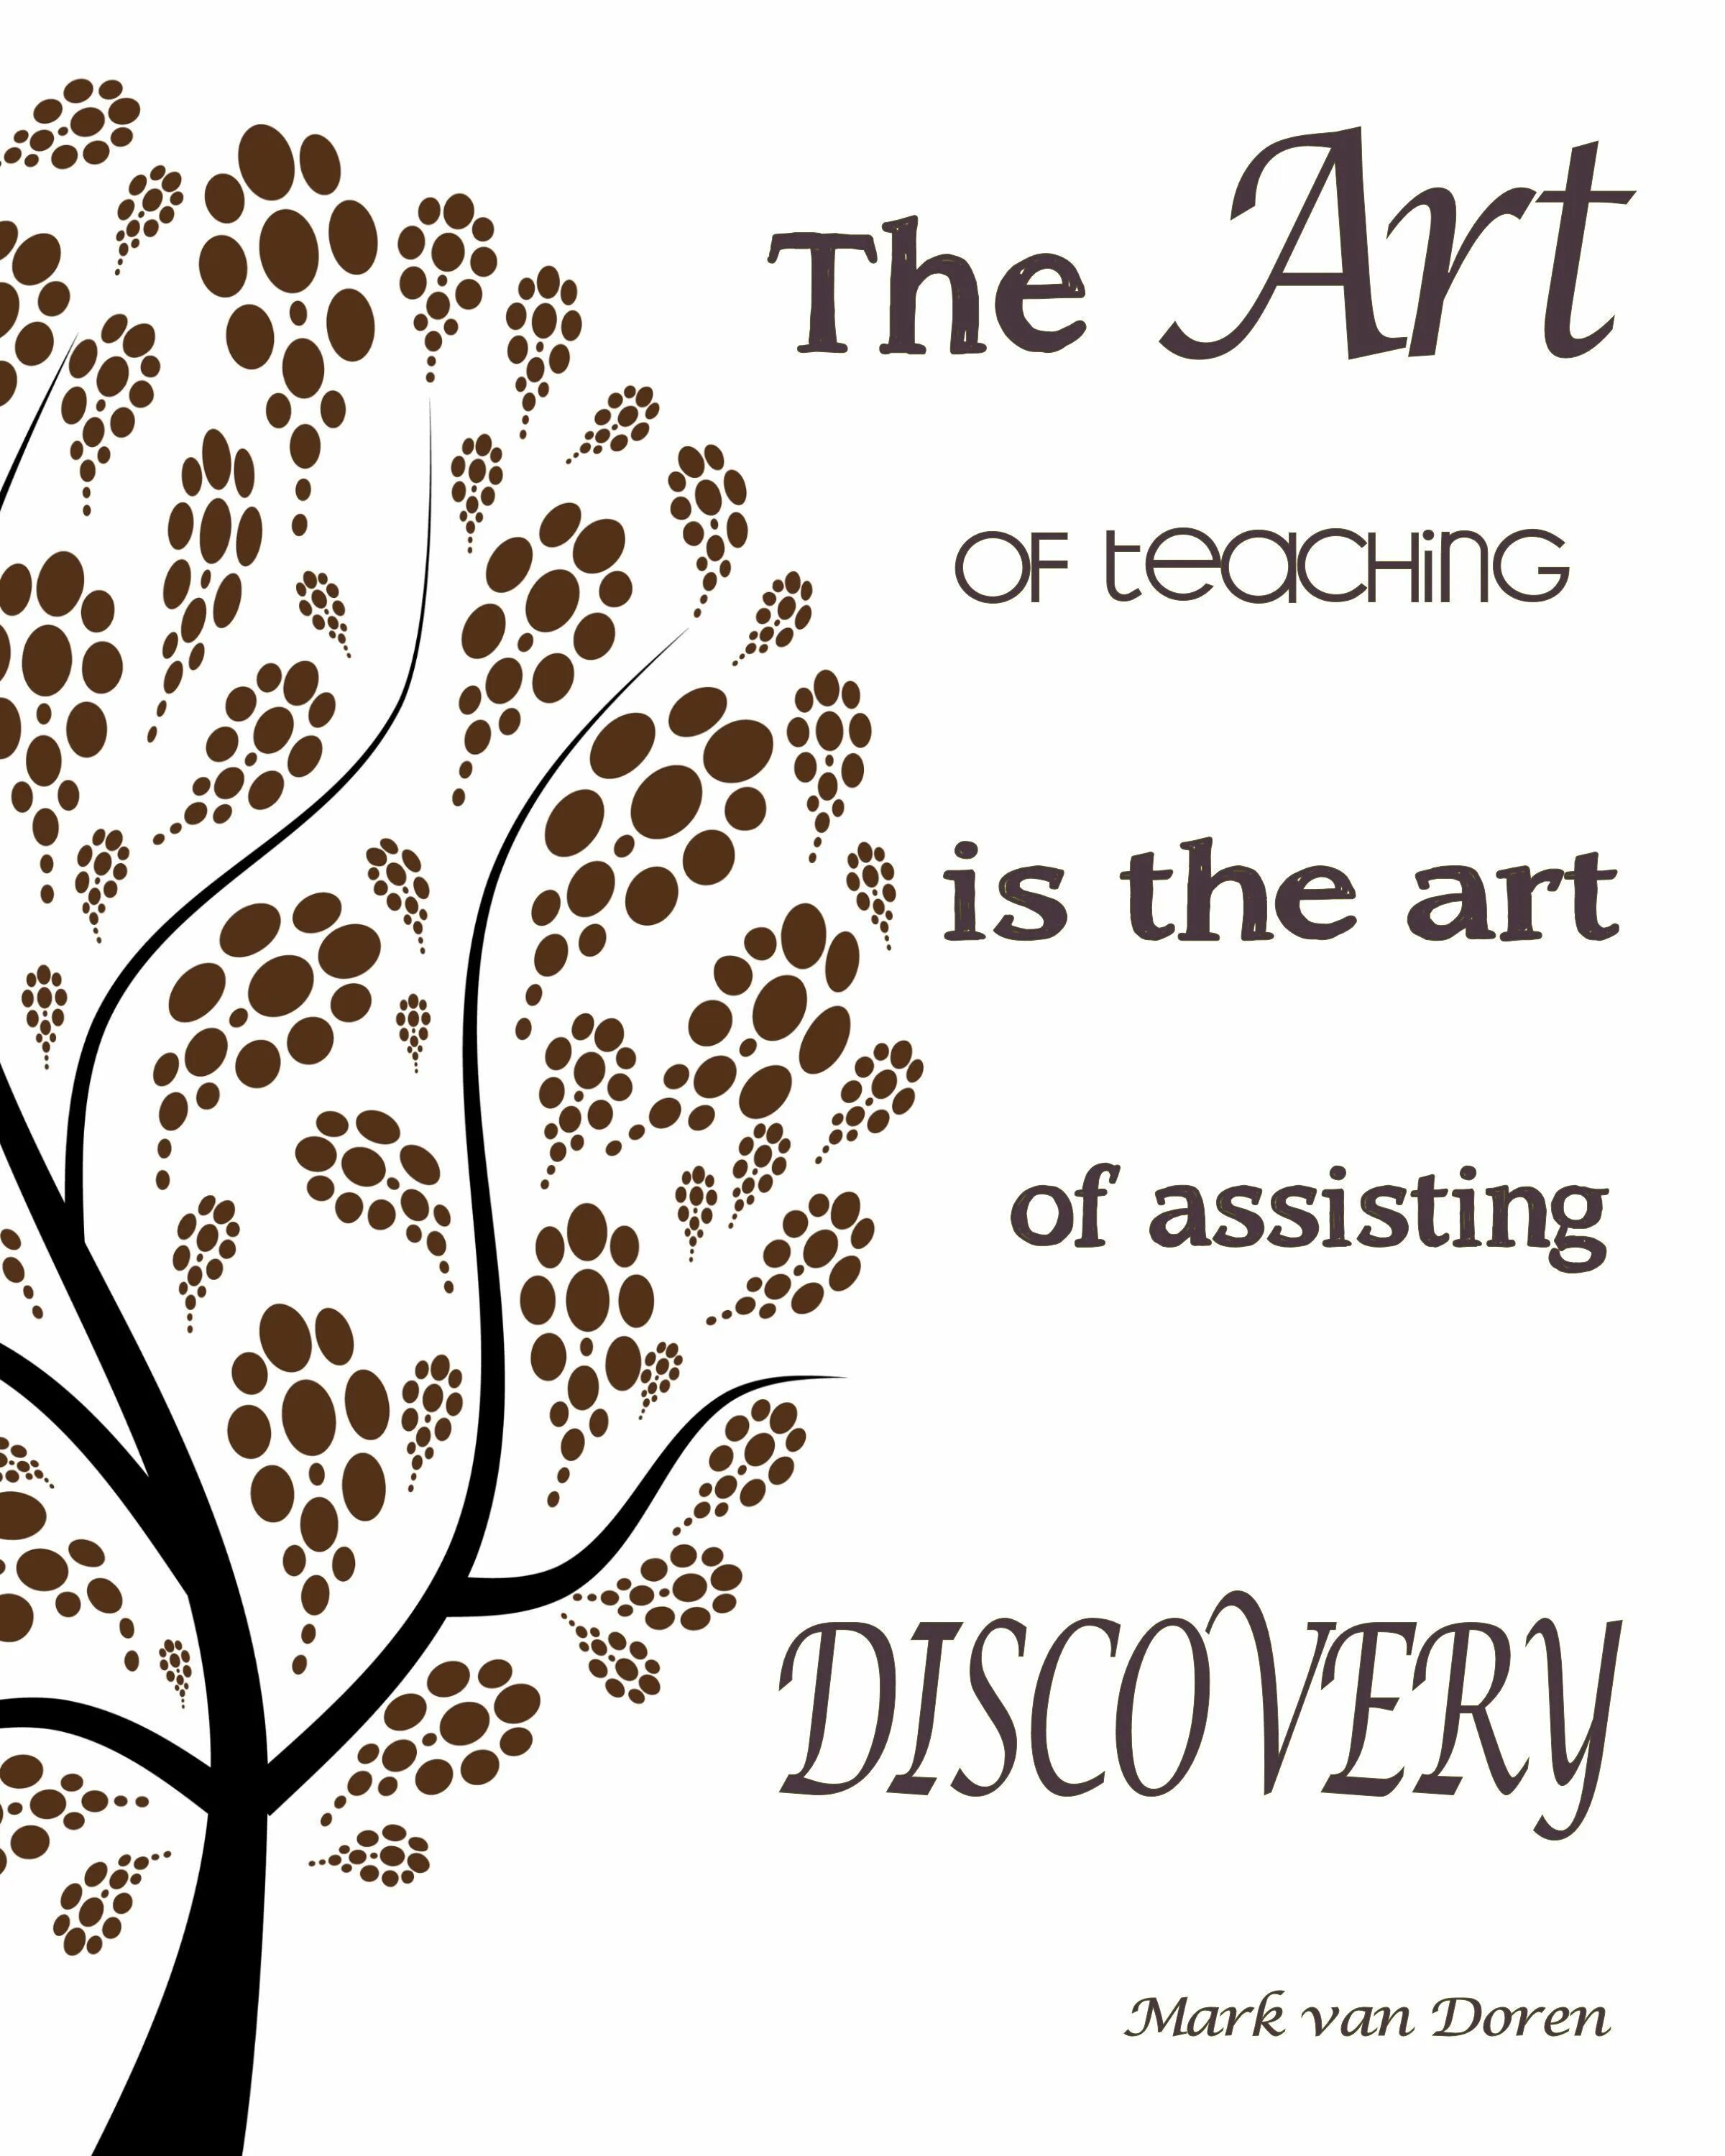 Teaching is art. Quotes about teaching and Learning. Quotation about teachers. Teacher quotes. Quotes about teachers.